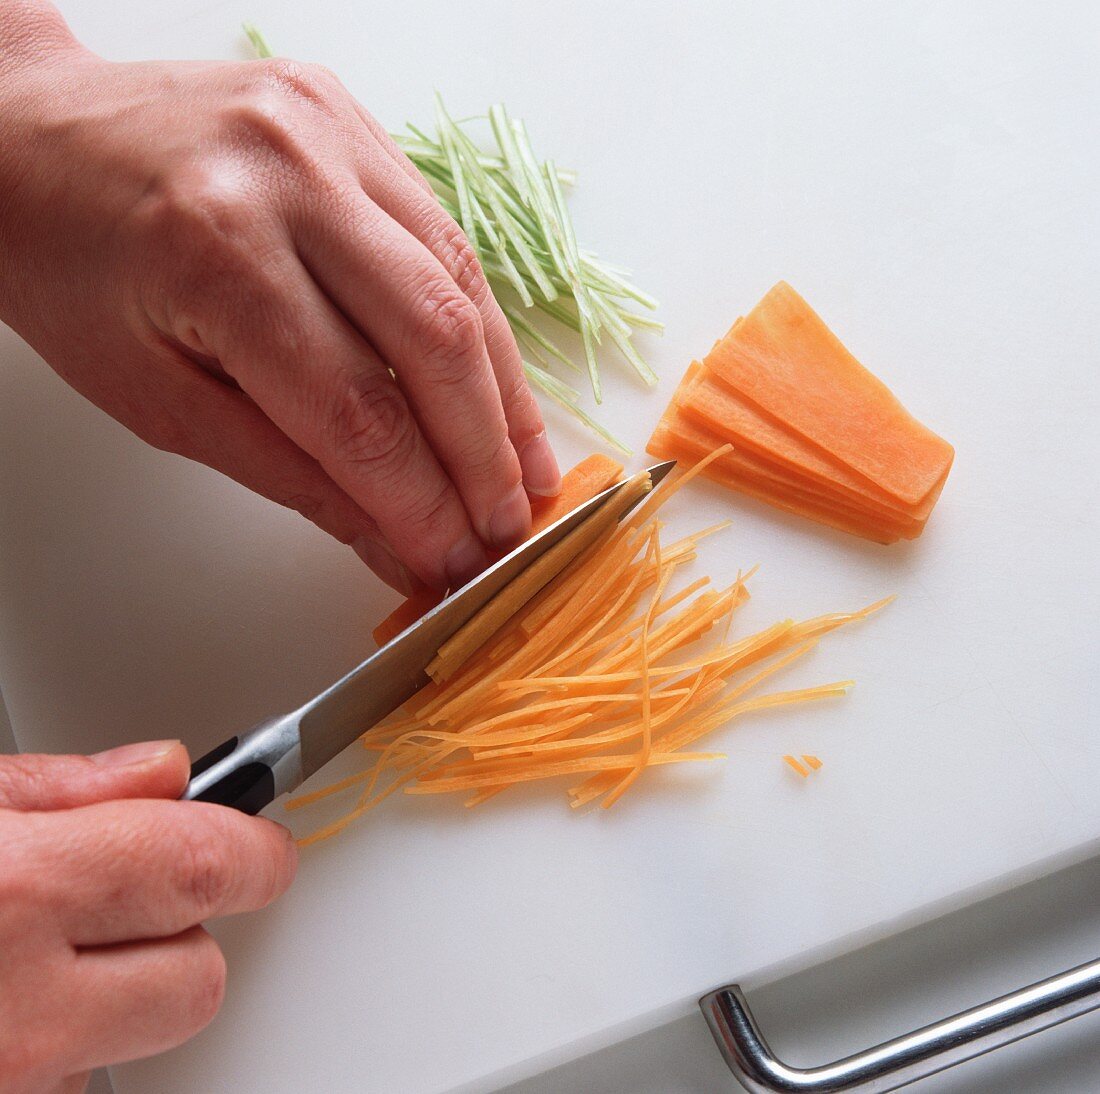 Cutting vegetables into julienne strips